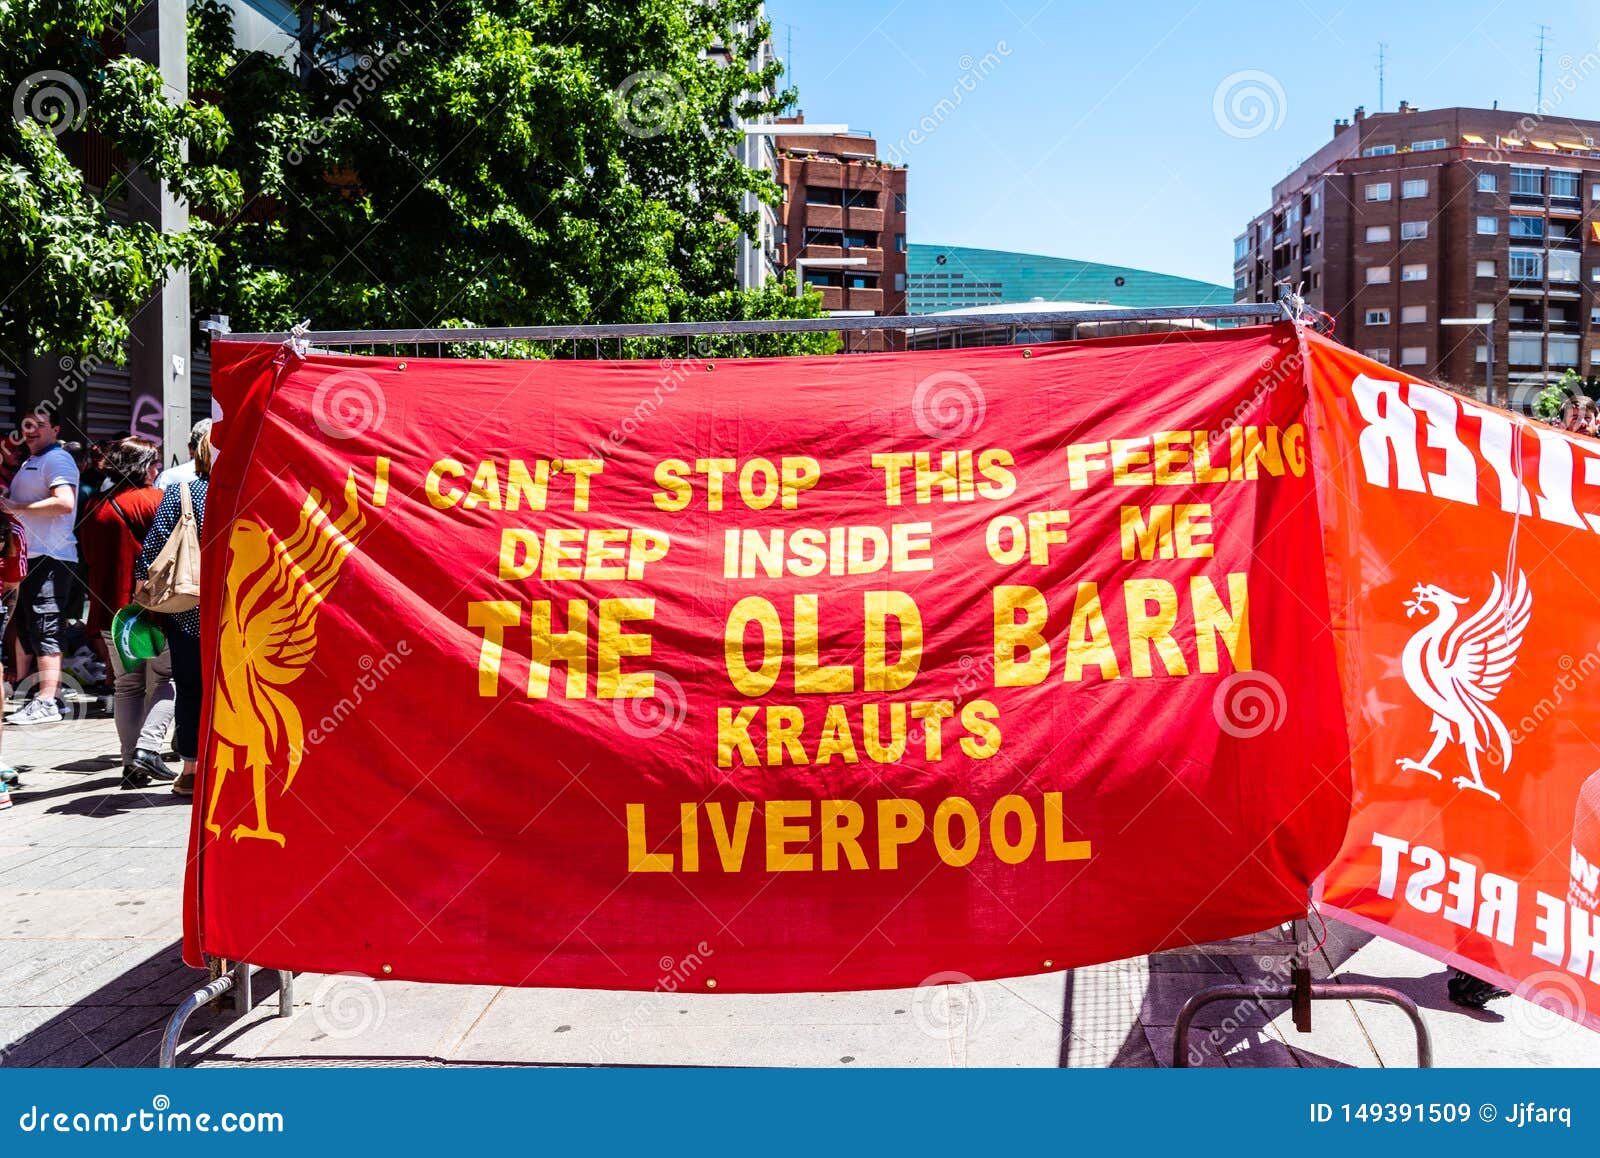 Liverpool Fans at the UEFA Champions League in Editorial Stock Image - Image of spain: